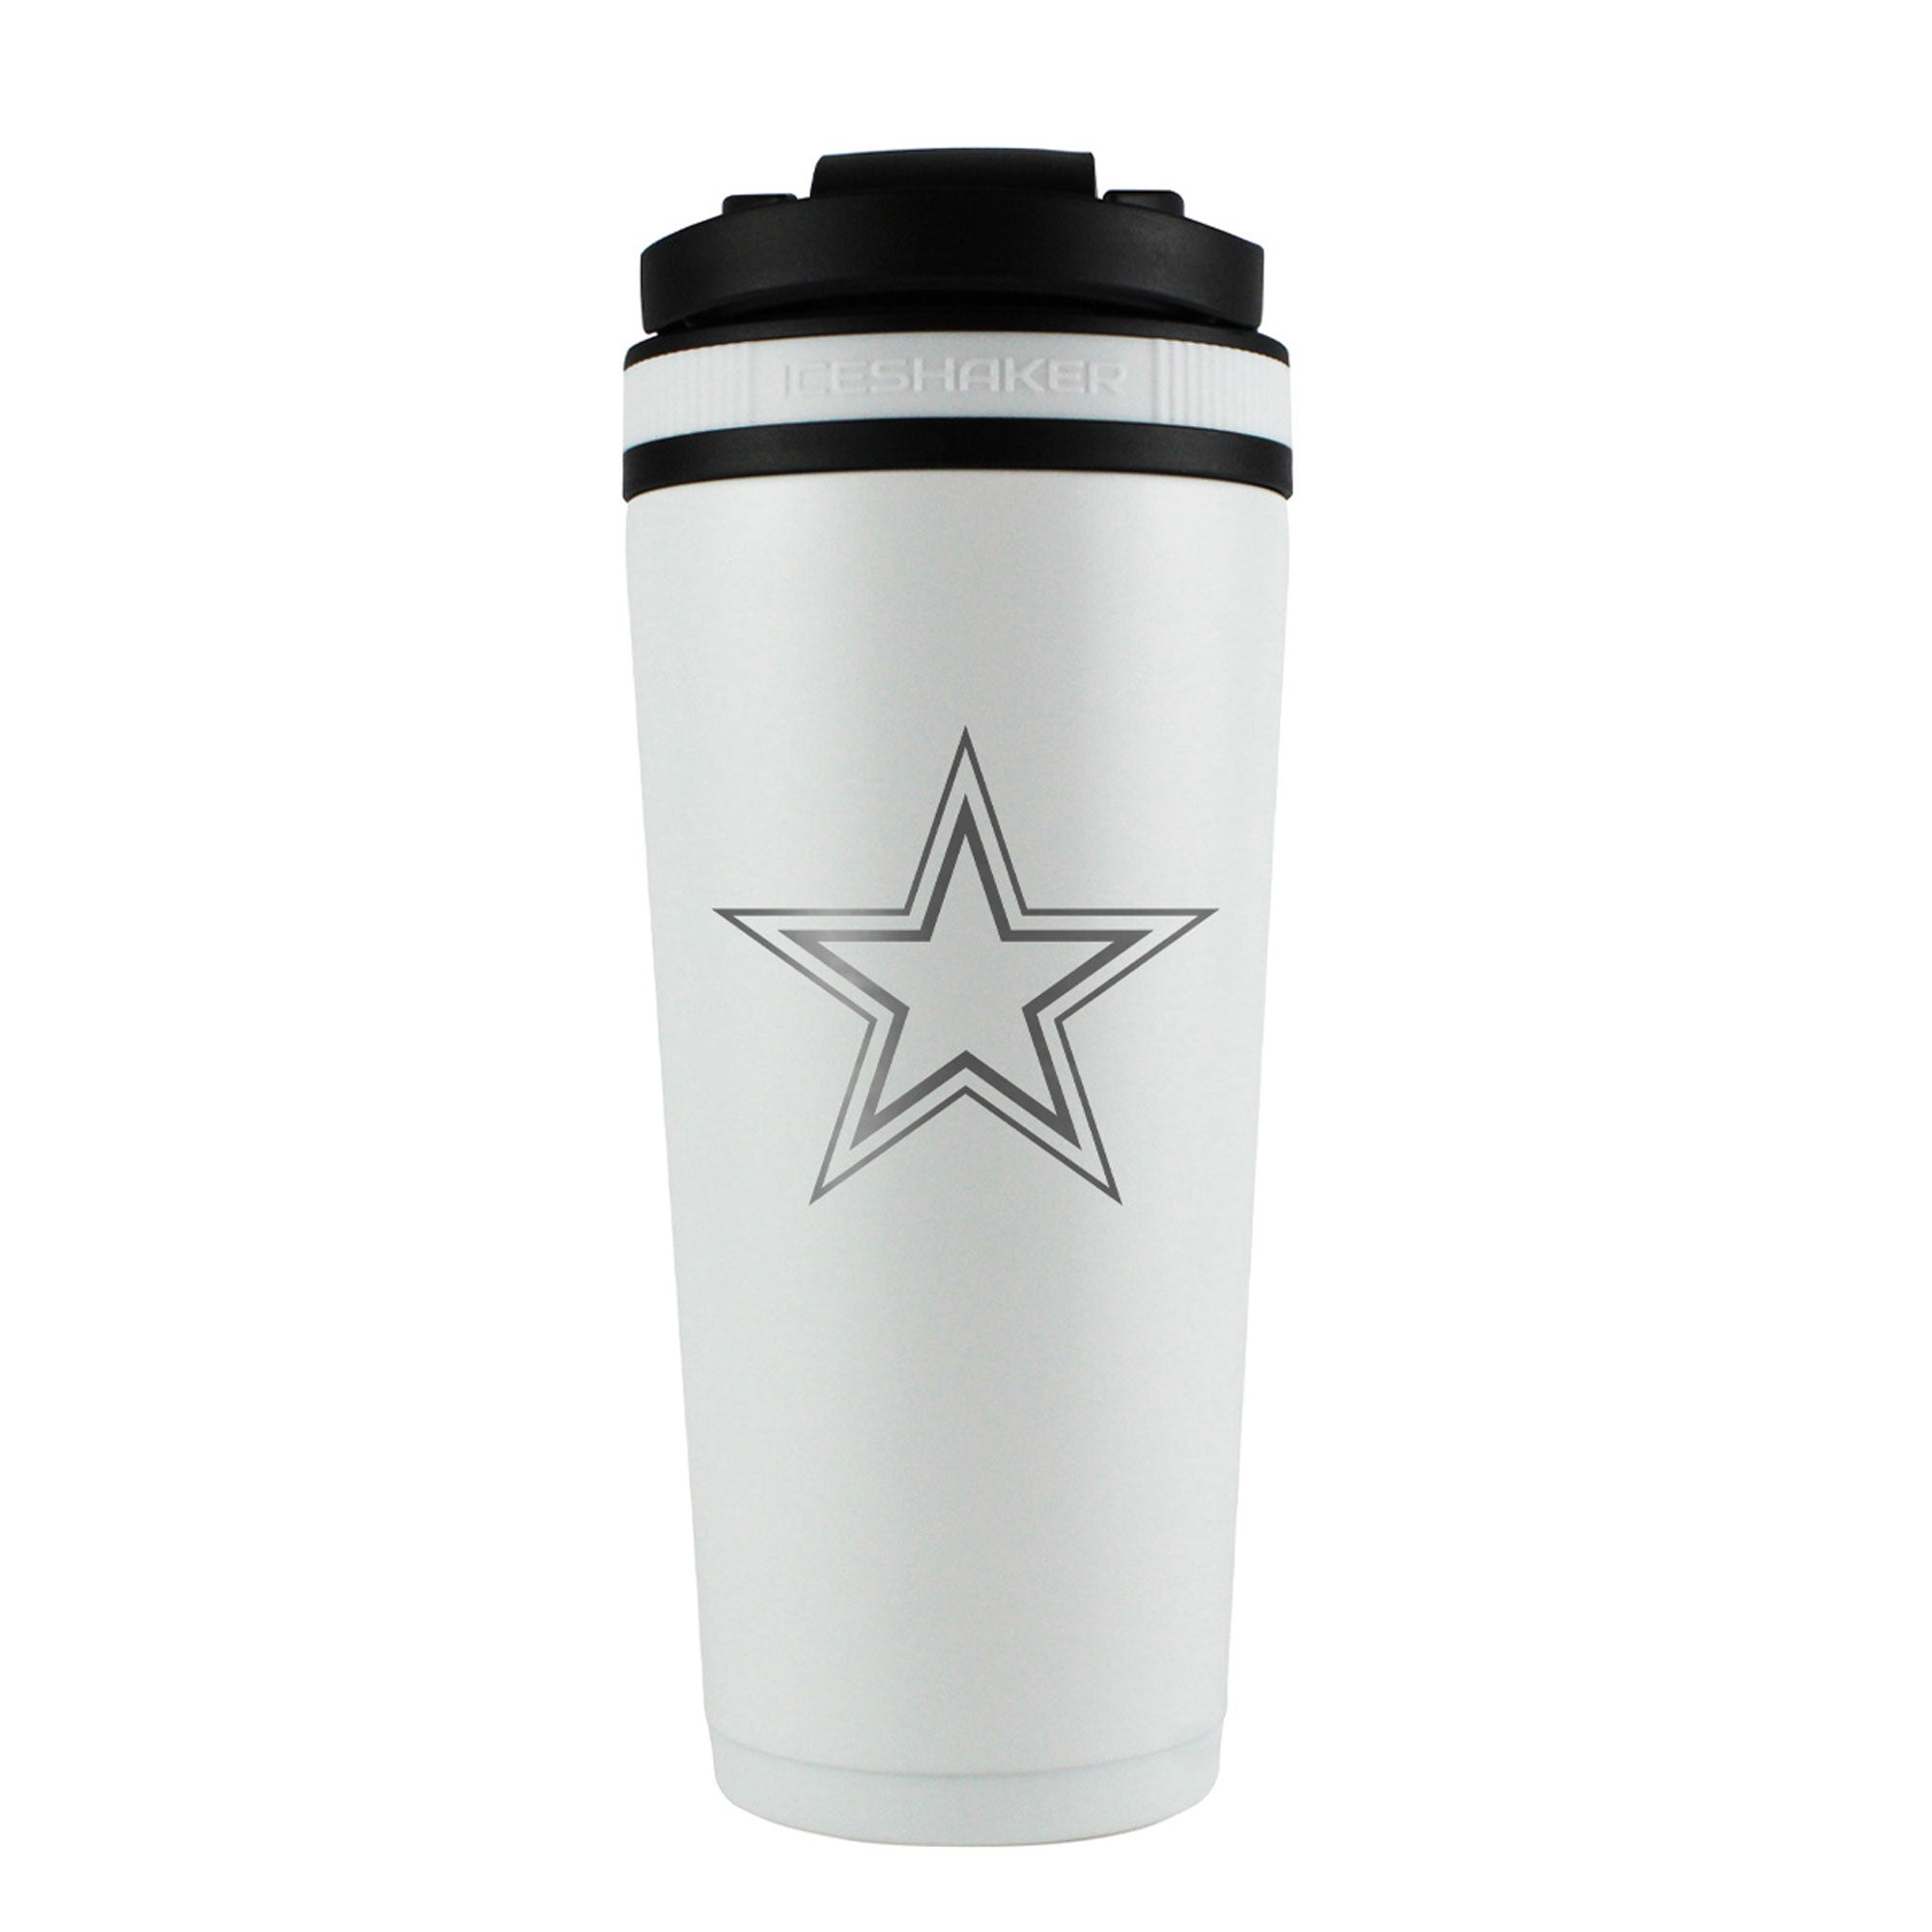 Officially Licensed Dallas Cowboys 26oz Ice Shaker - White